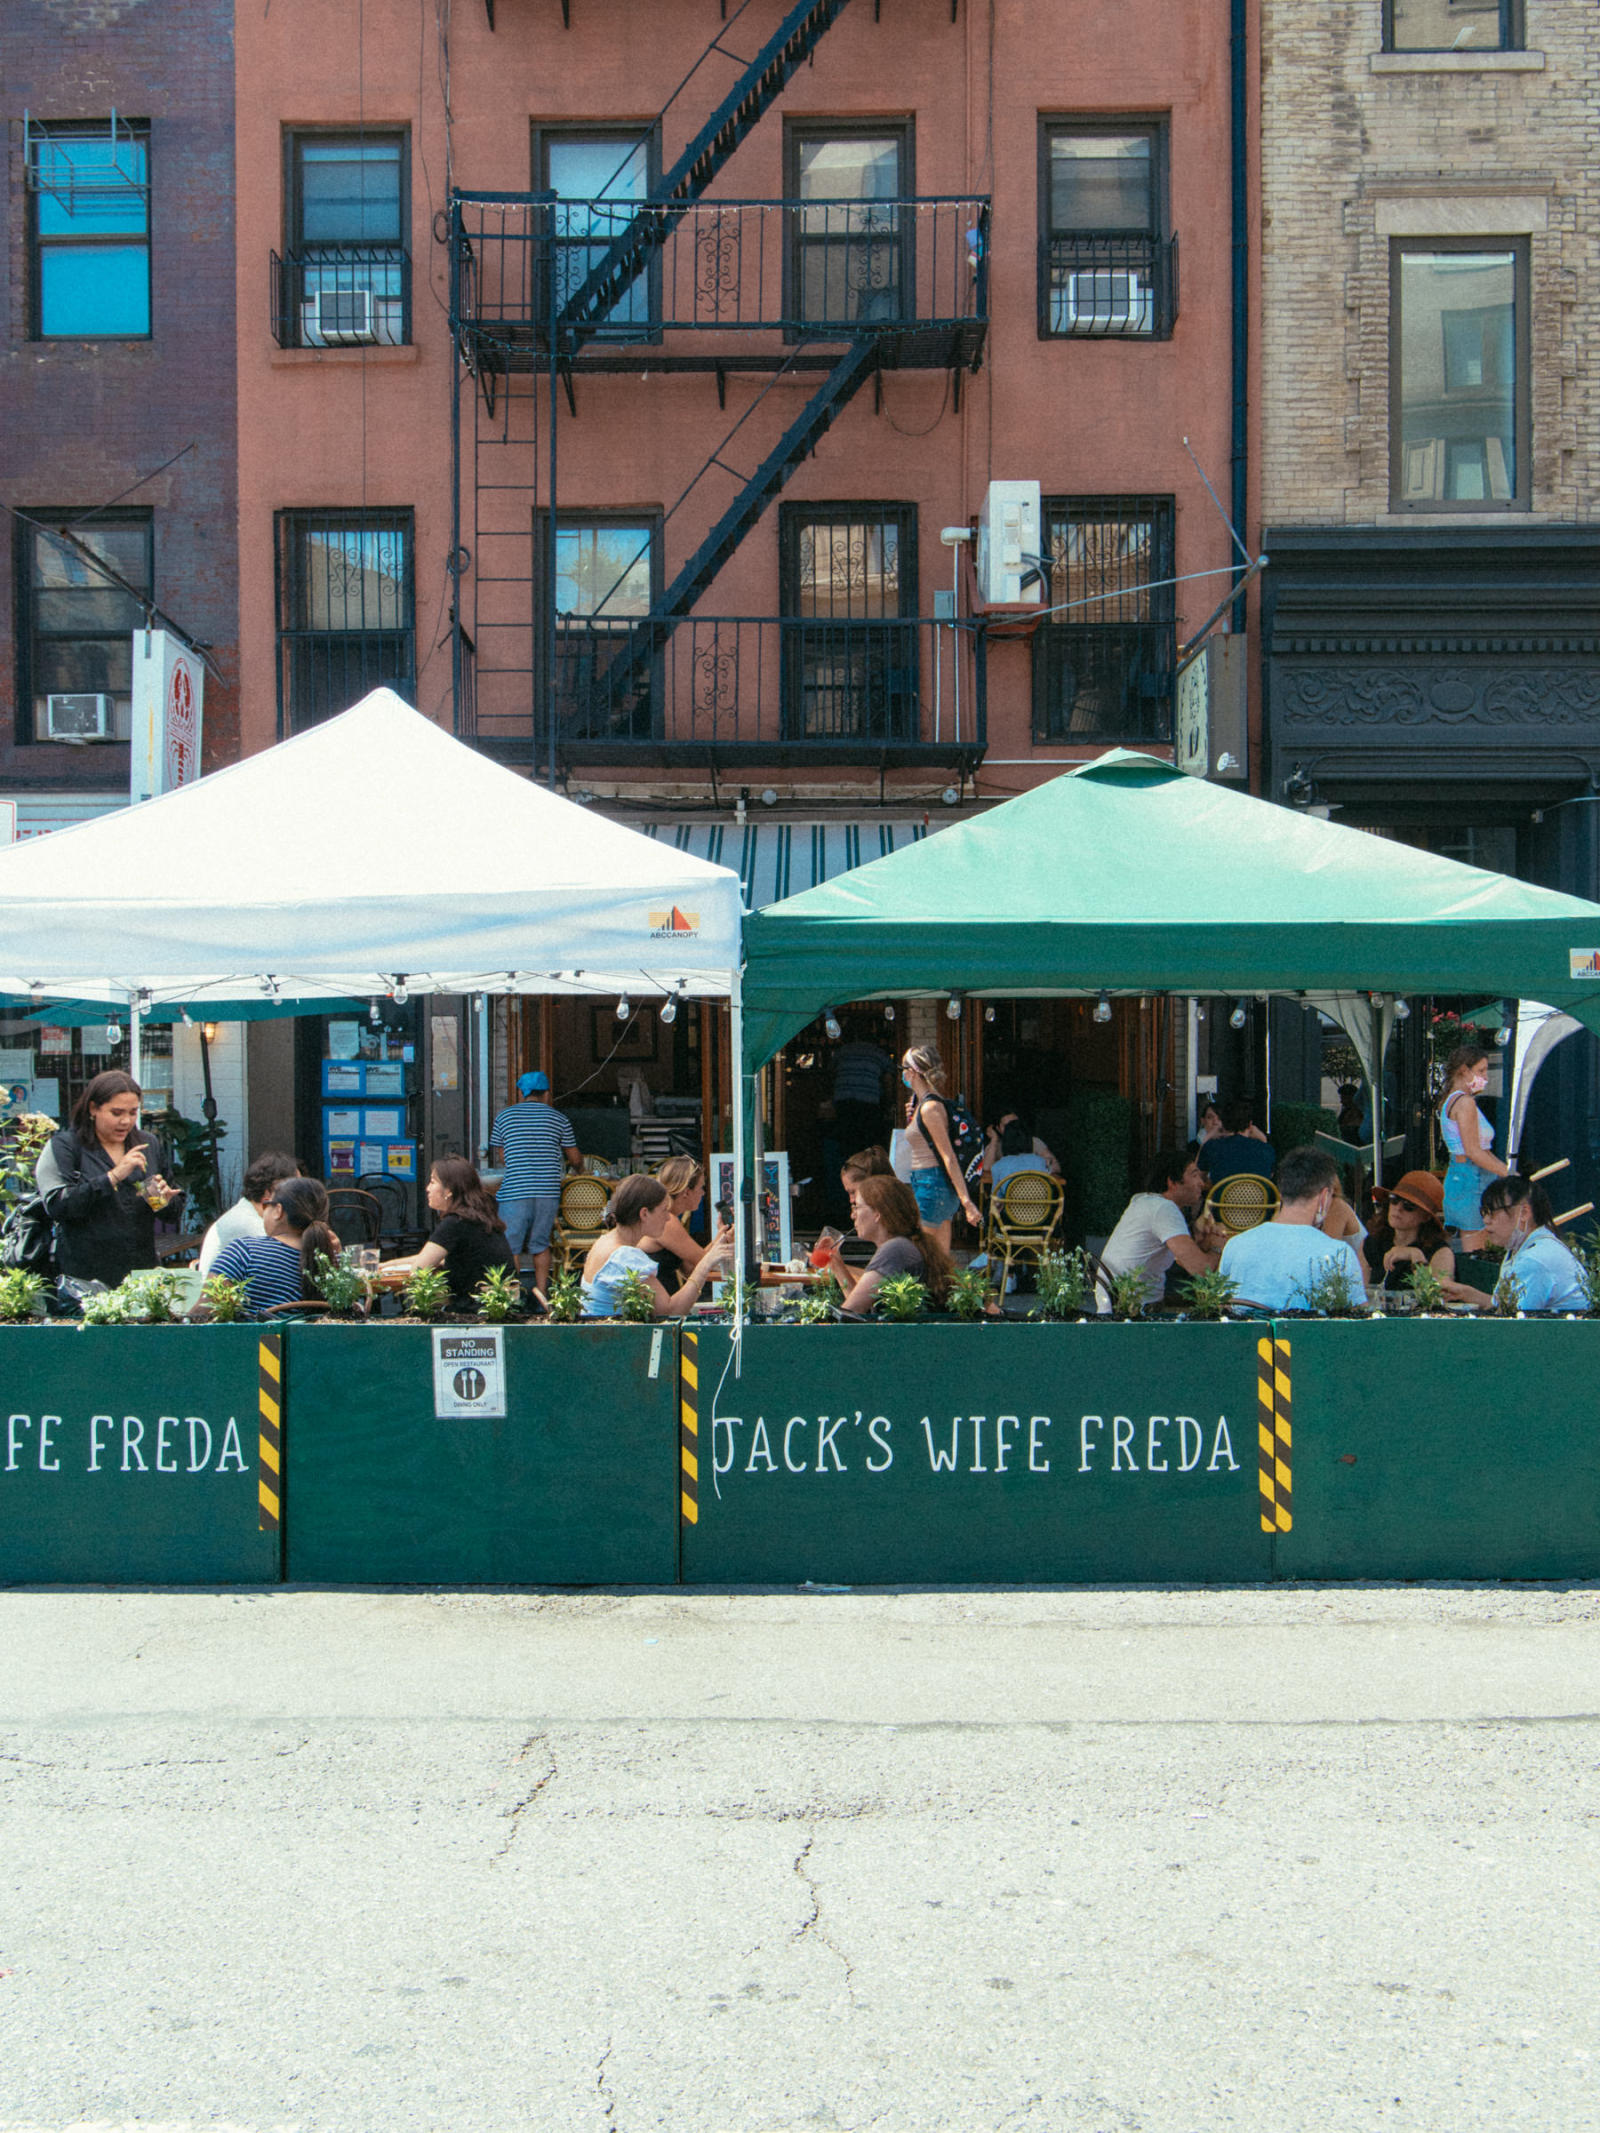 Outdoor dining at JACK’S WIFE FREDA